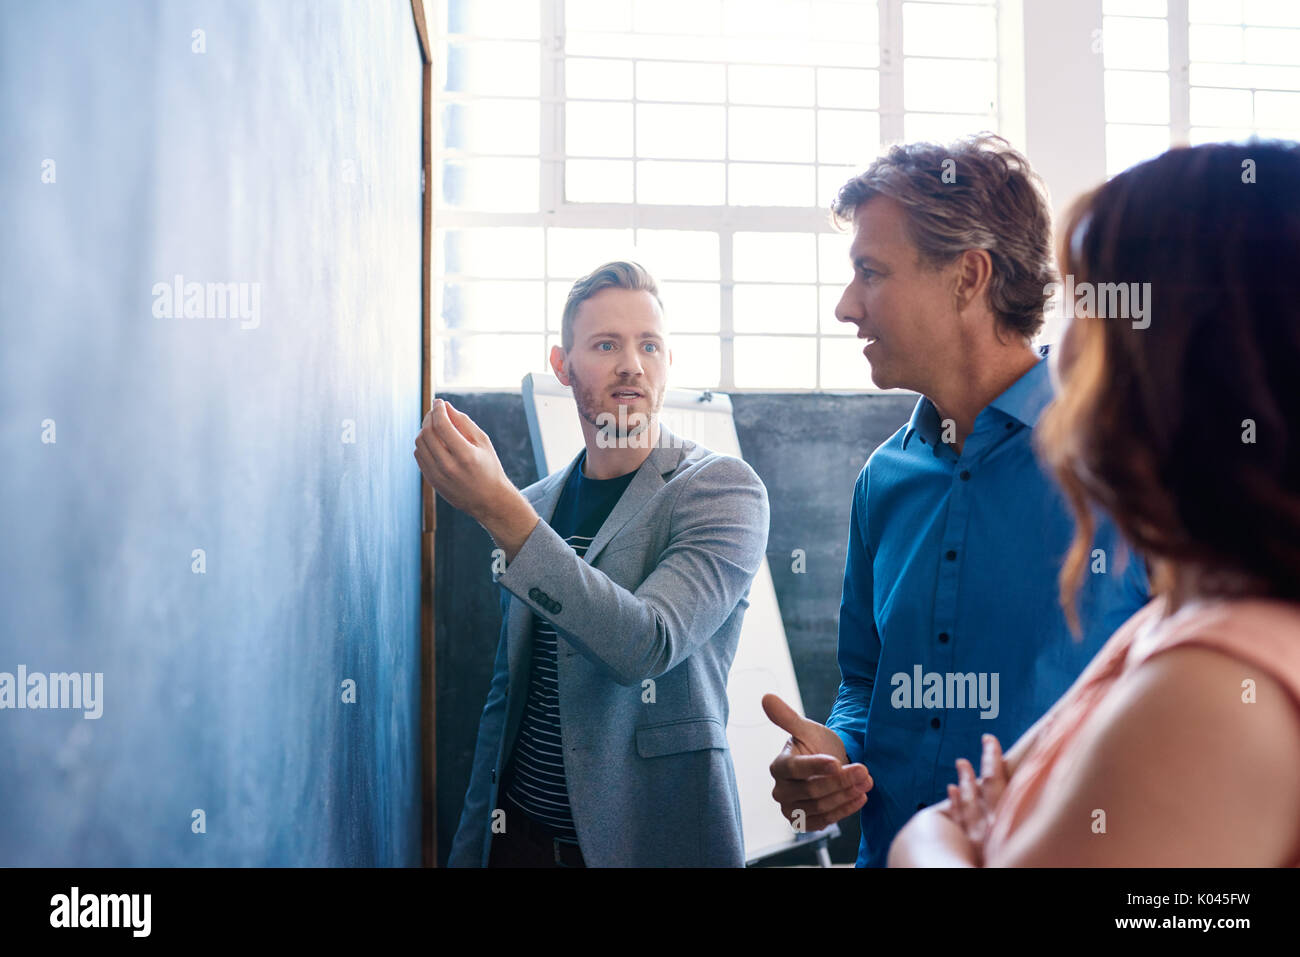 Focused work colleagues brainstorming on a chalkboard in an office Stock Photo